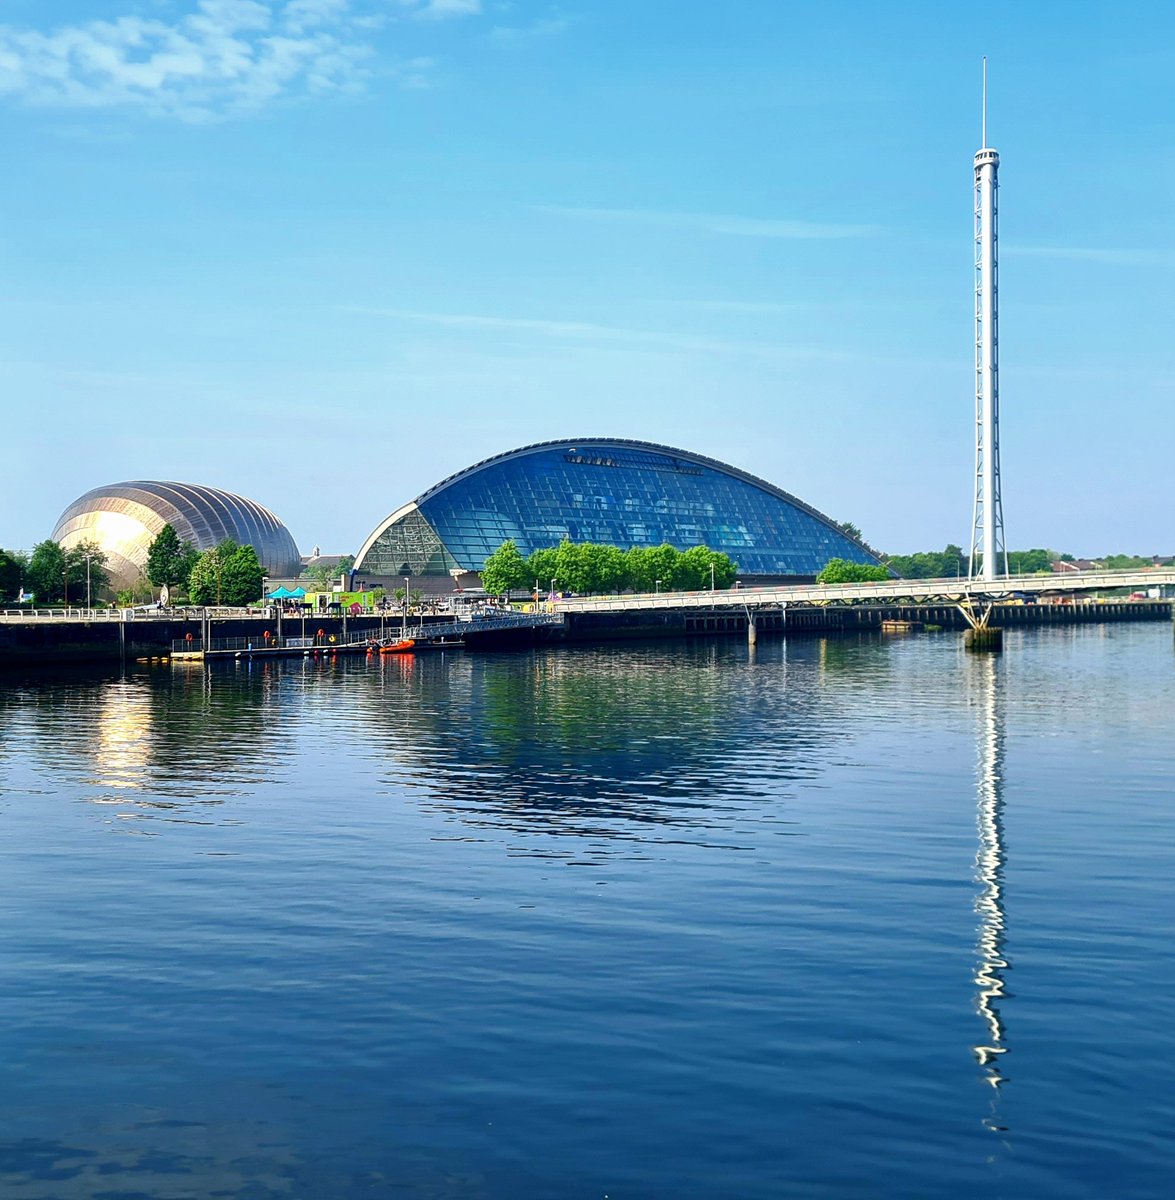 Looking across the Clyde to the Glasgow Science Centre complex. 

#glasgow #architecture #glasgowbuildings #theclyde #glasgowsciencecentre